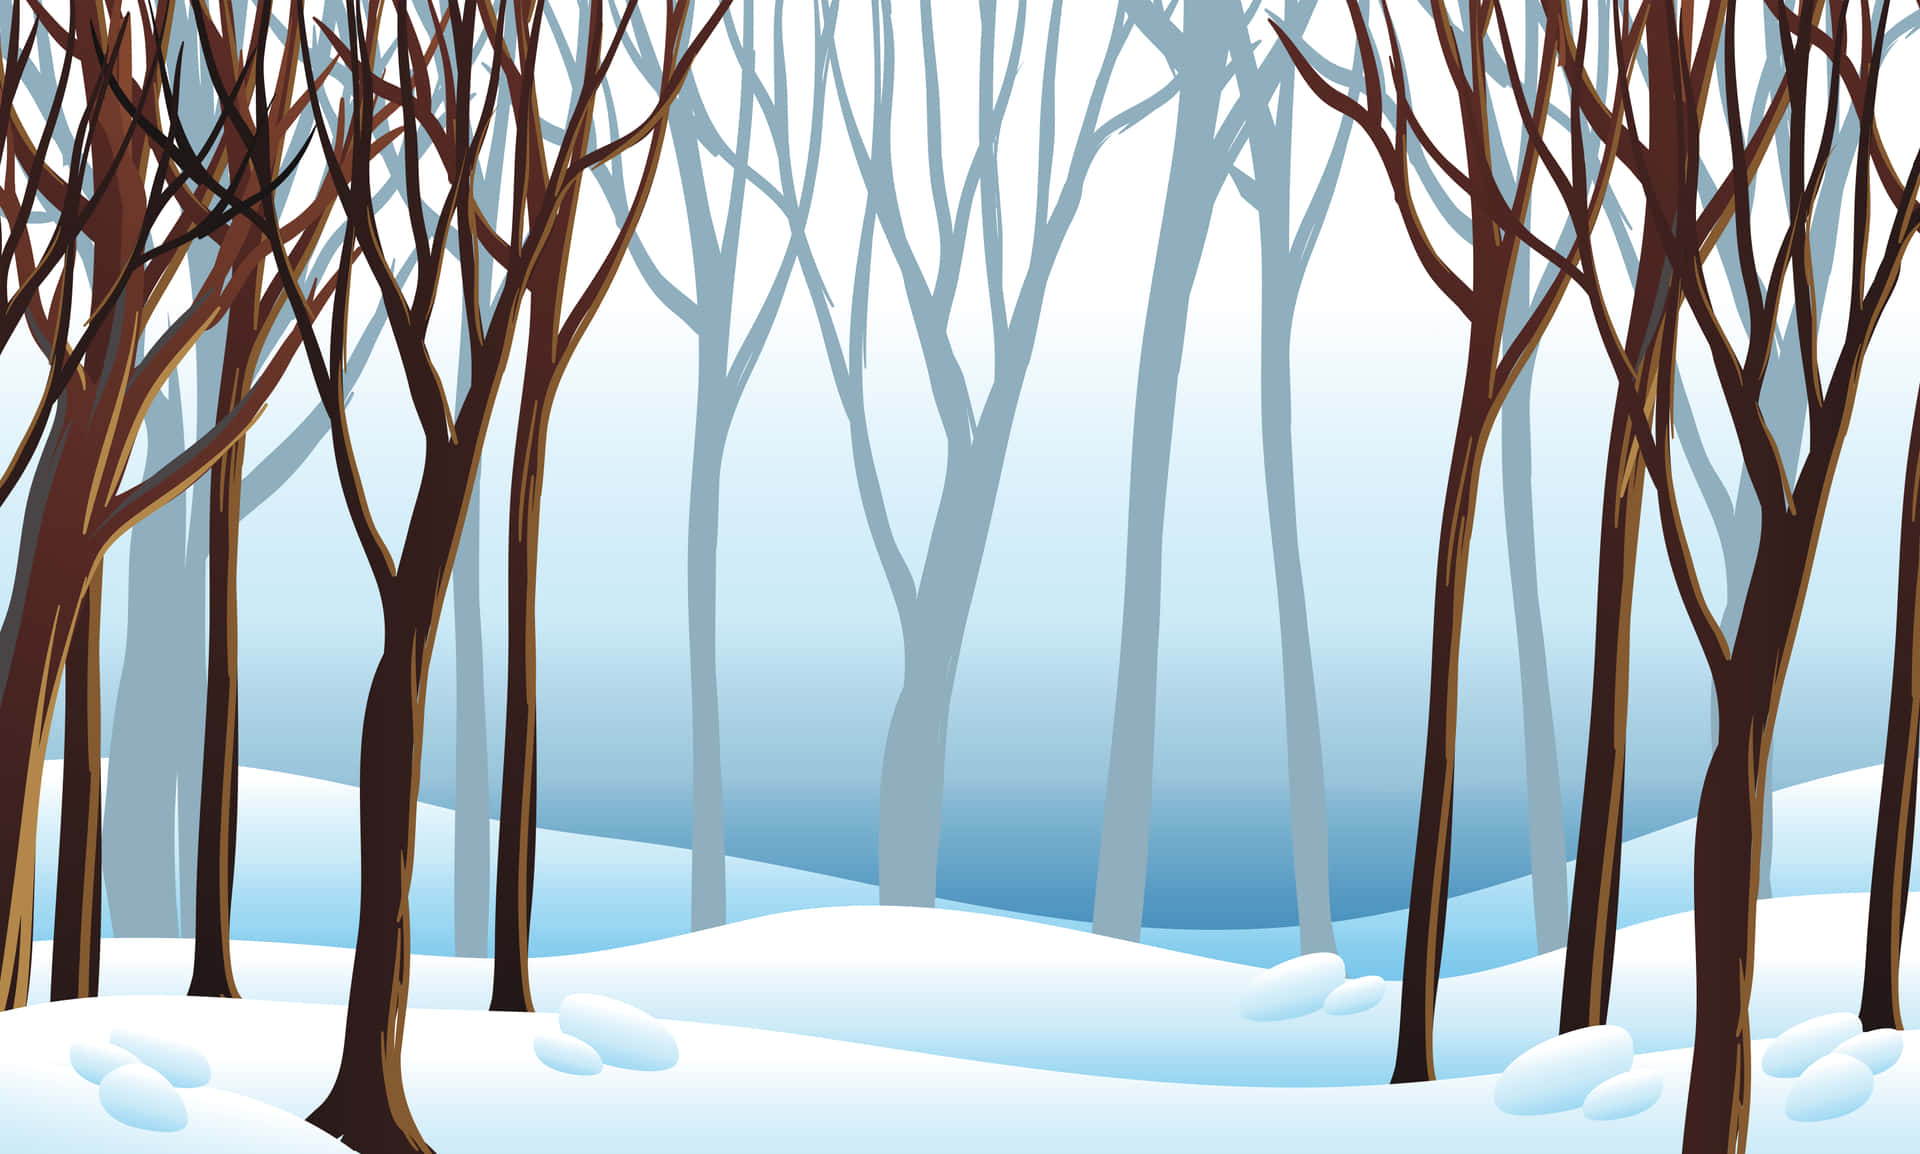 Enjoy a tranquil winter forest with snow-covered trees